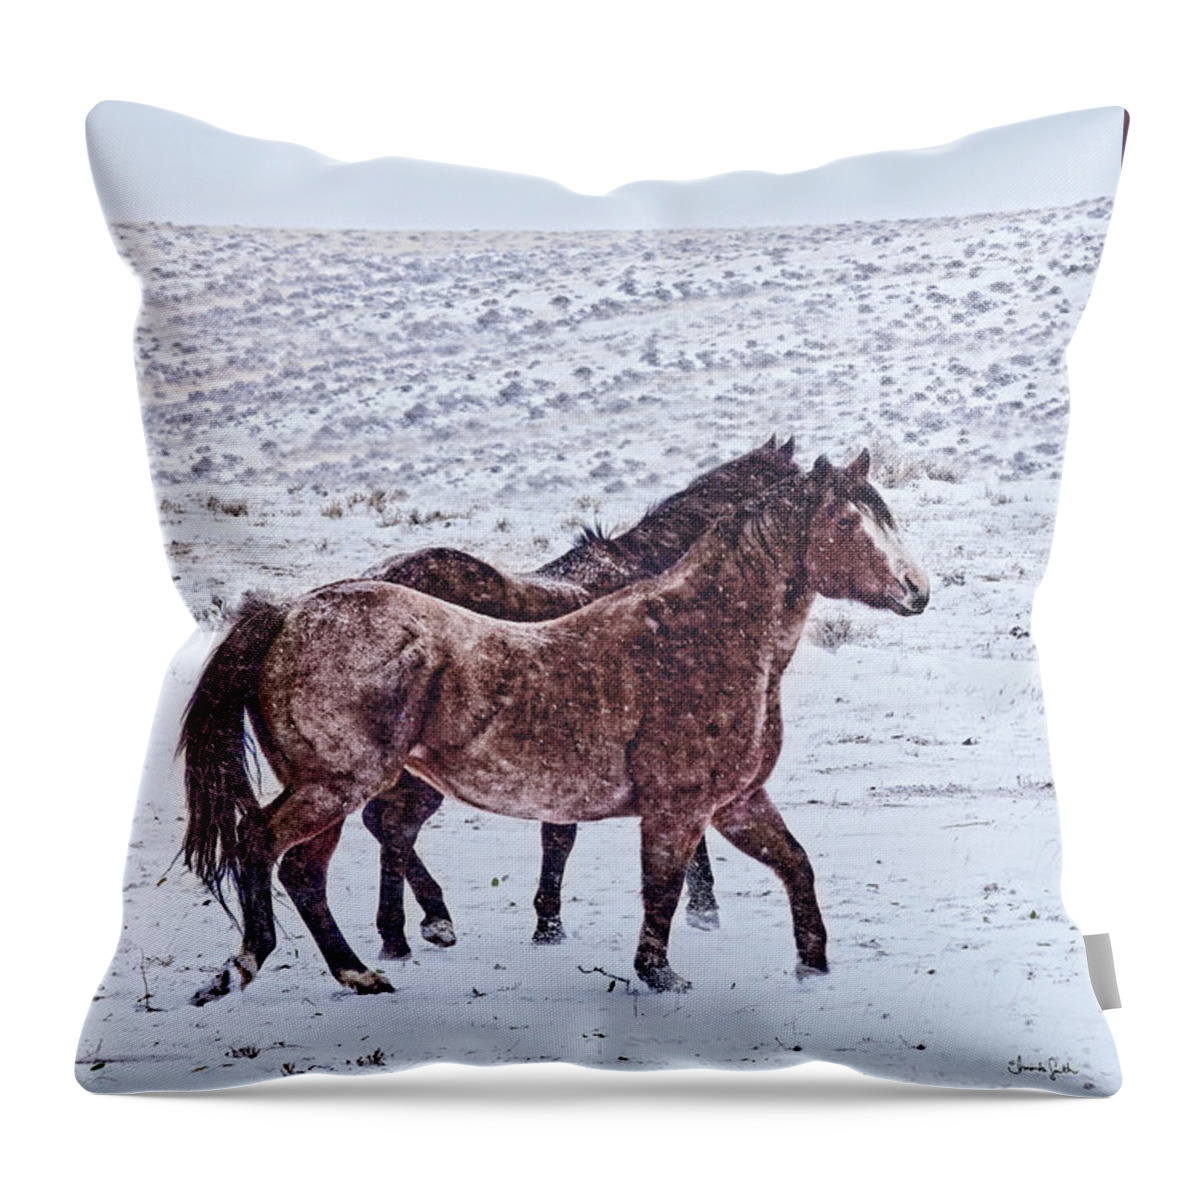 Snow Throw Pillow featuring the photograph Prancing in the Snow by Amanda Smith